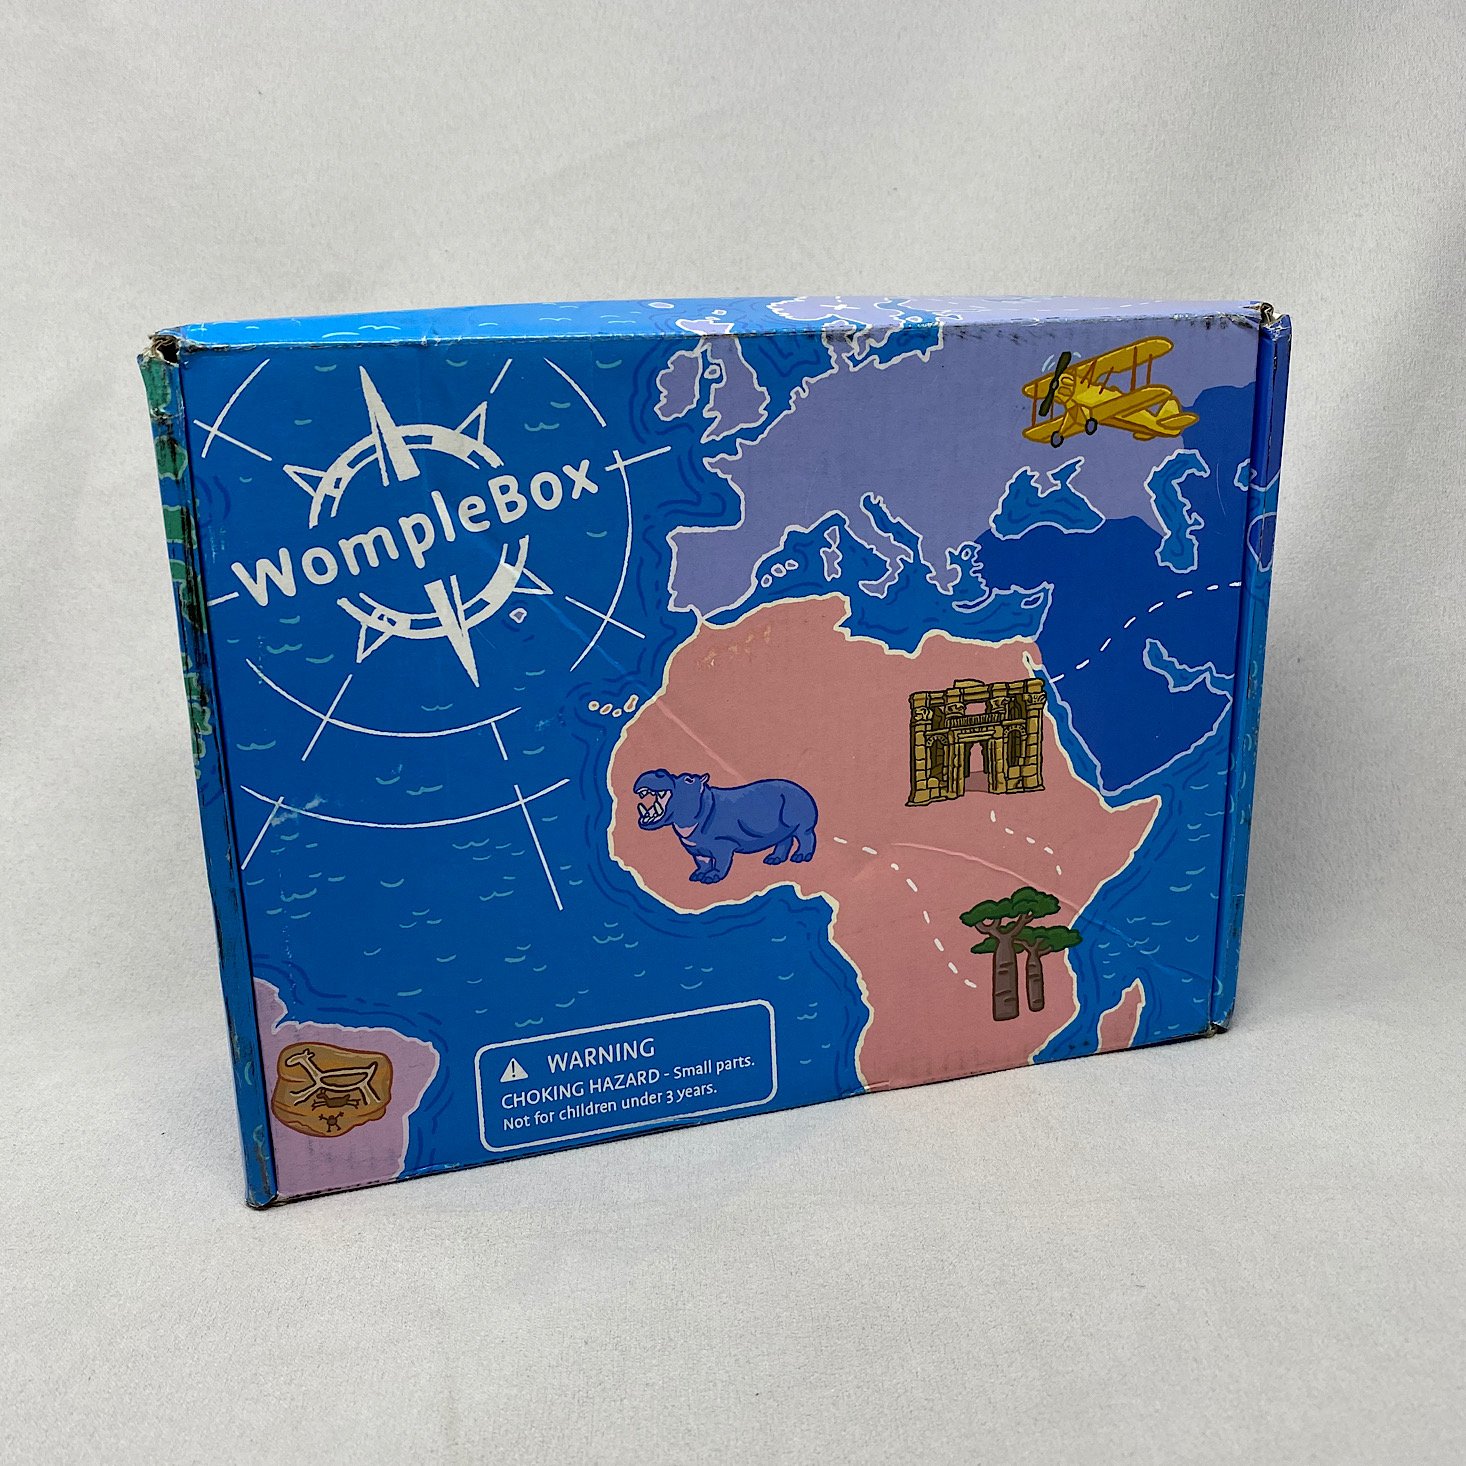 WompleBox “Mongolia” Box Review + Coupon – December 2020